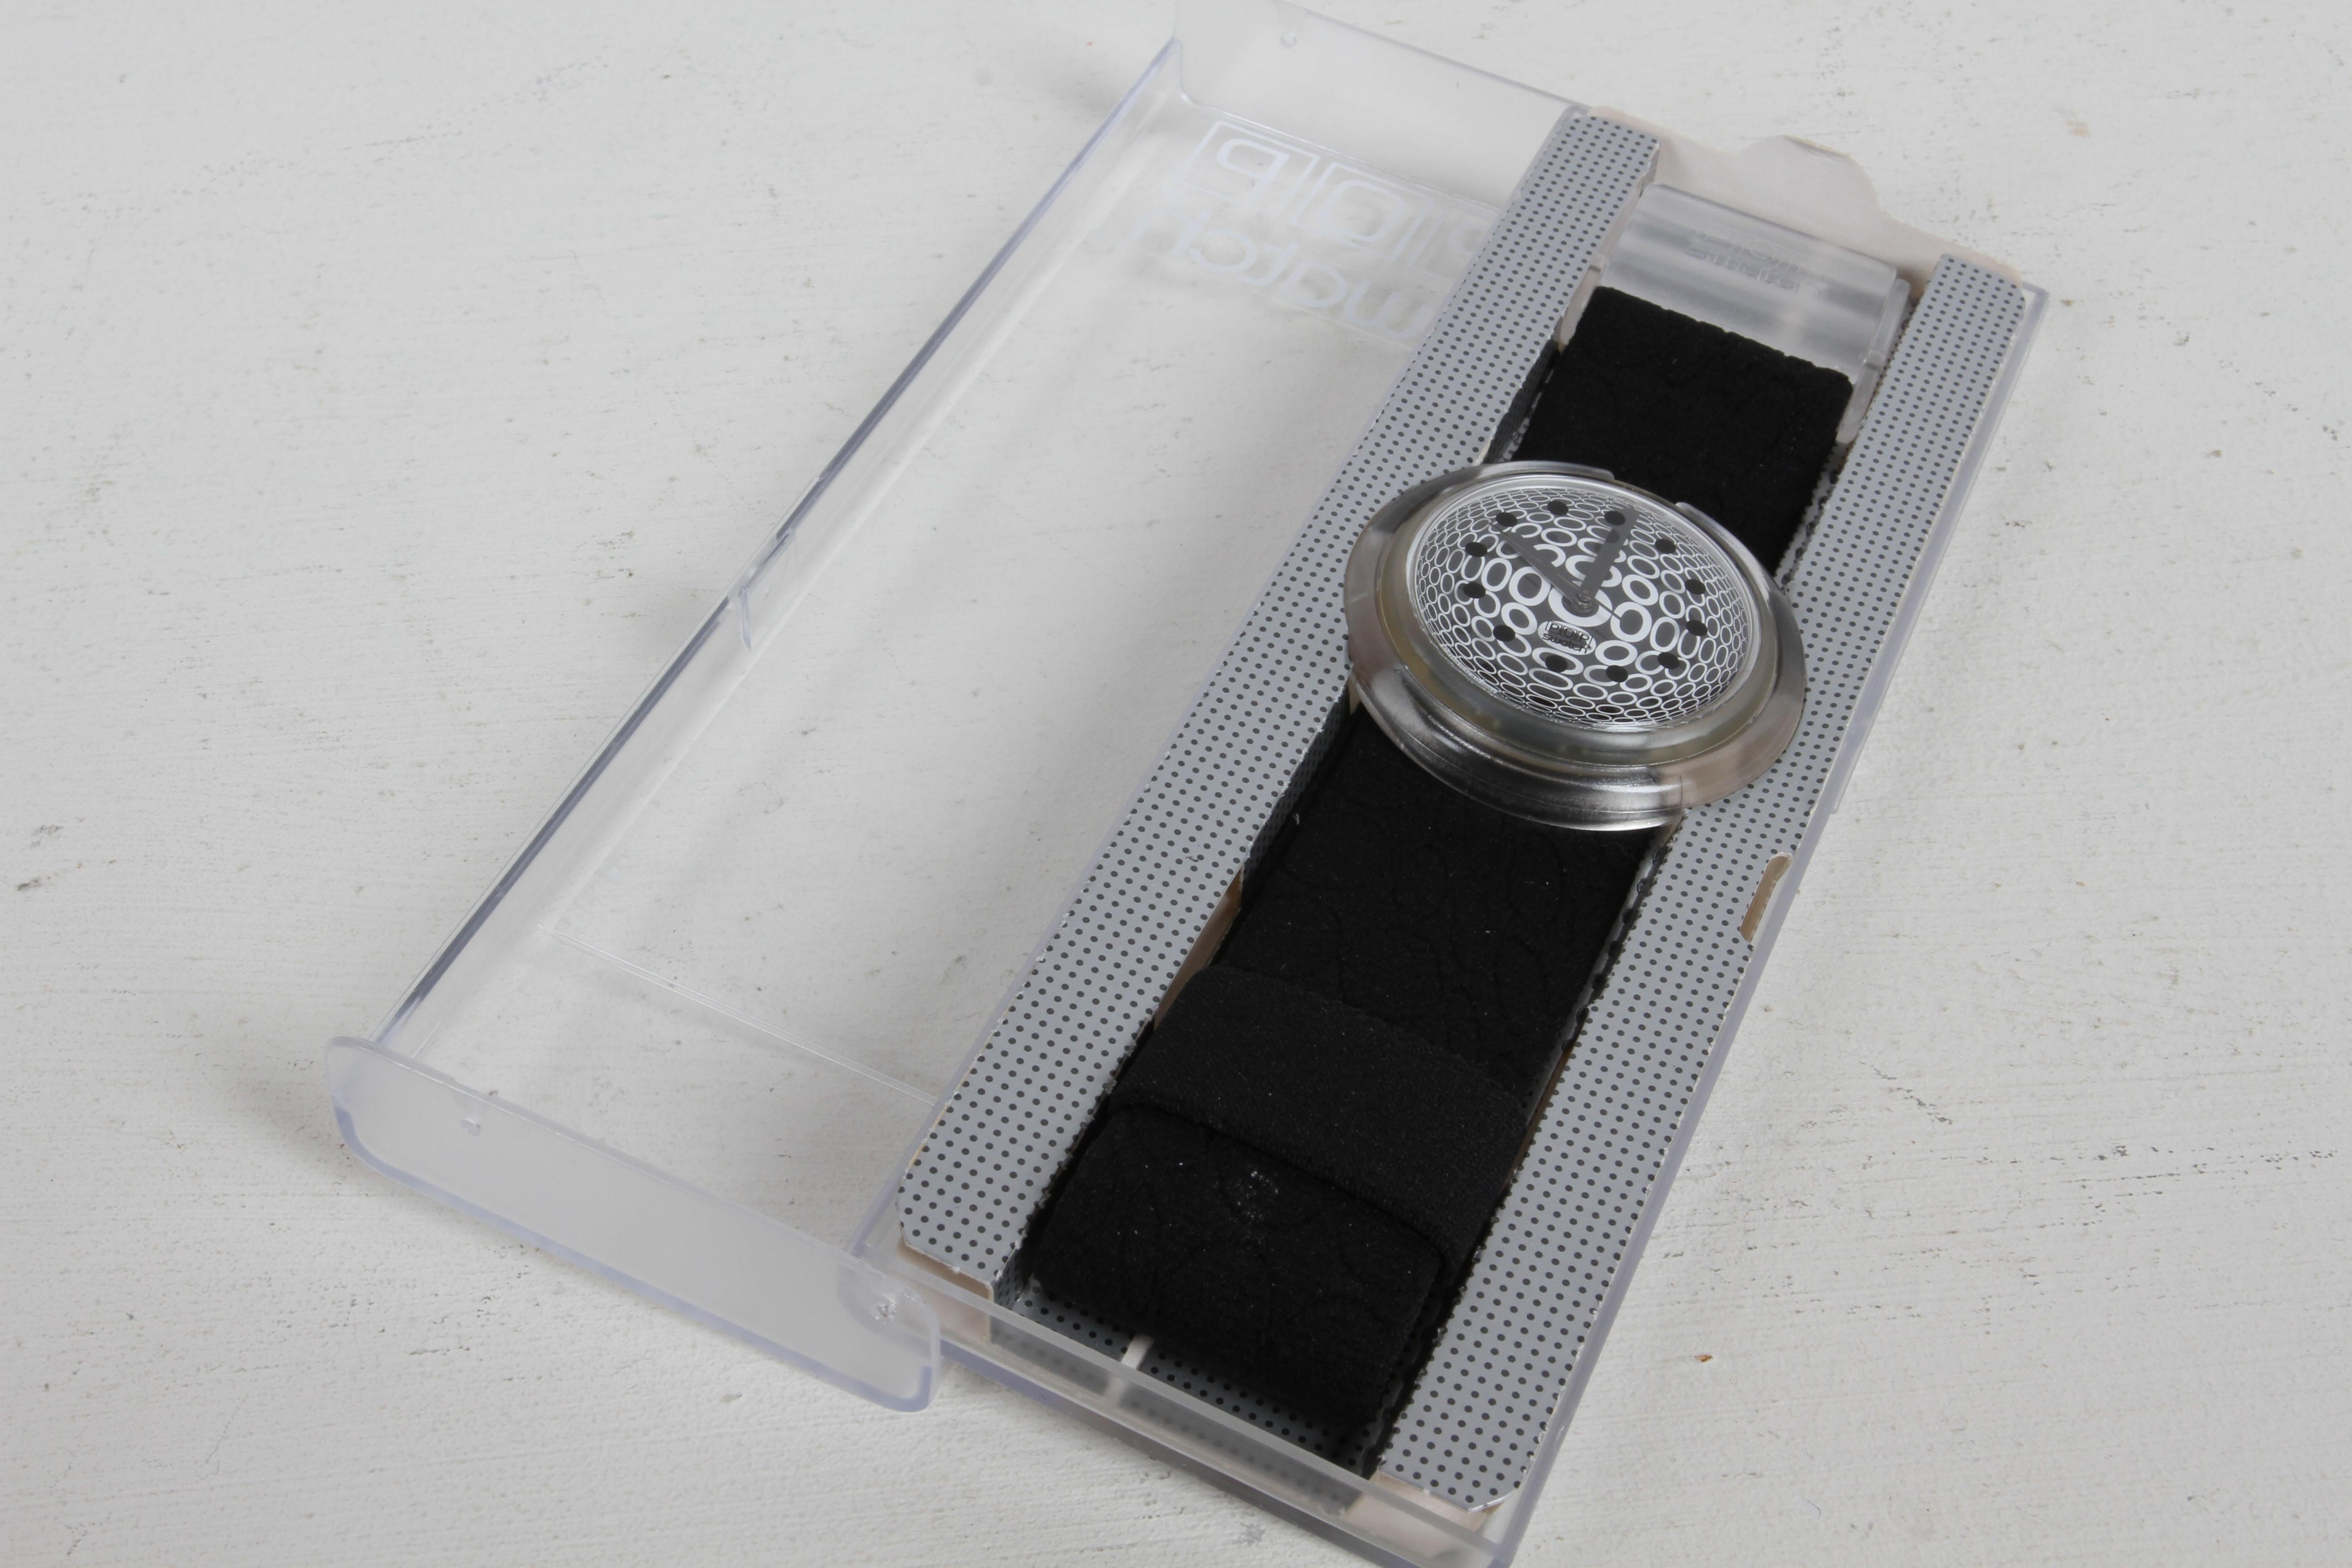 Plastic 1992 Vintage POP Swatch Watch Special Dots - Op Art - Designed by Vasarely - NOS For Sale